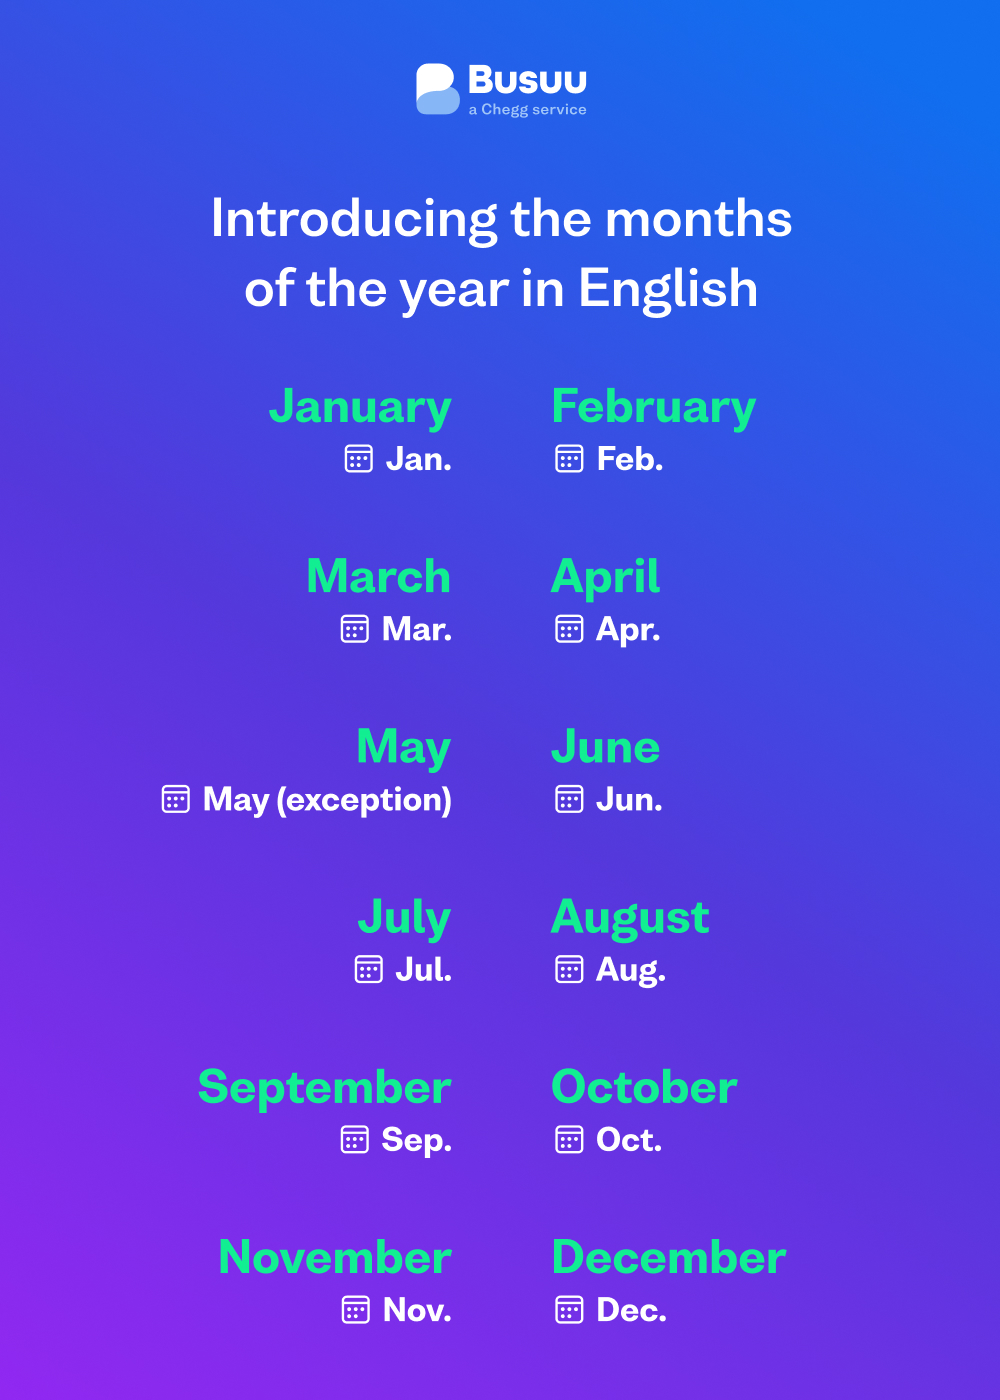 Months of the year in English